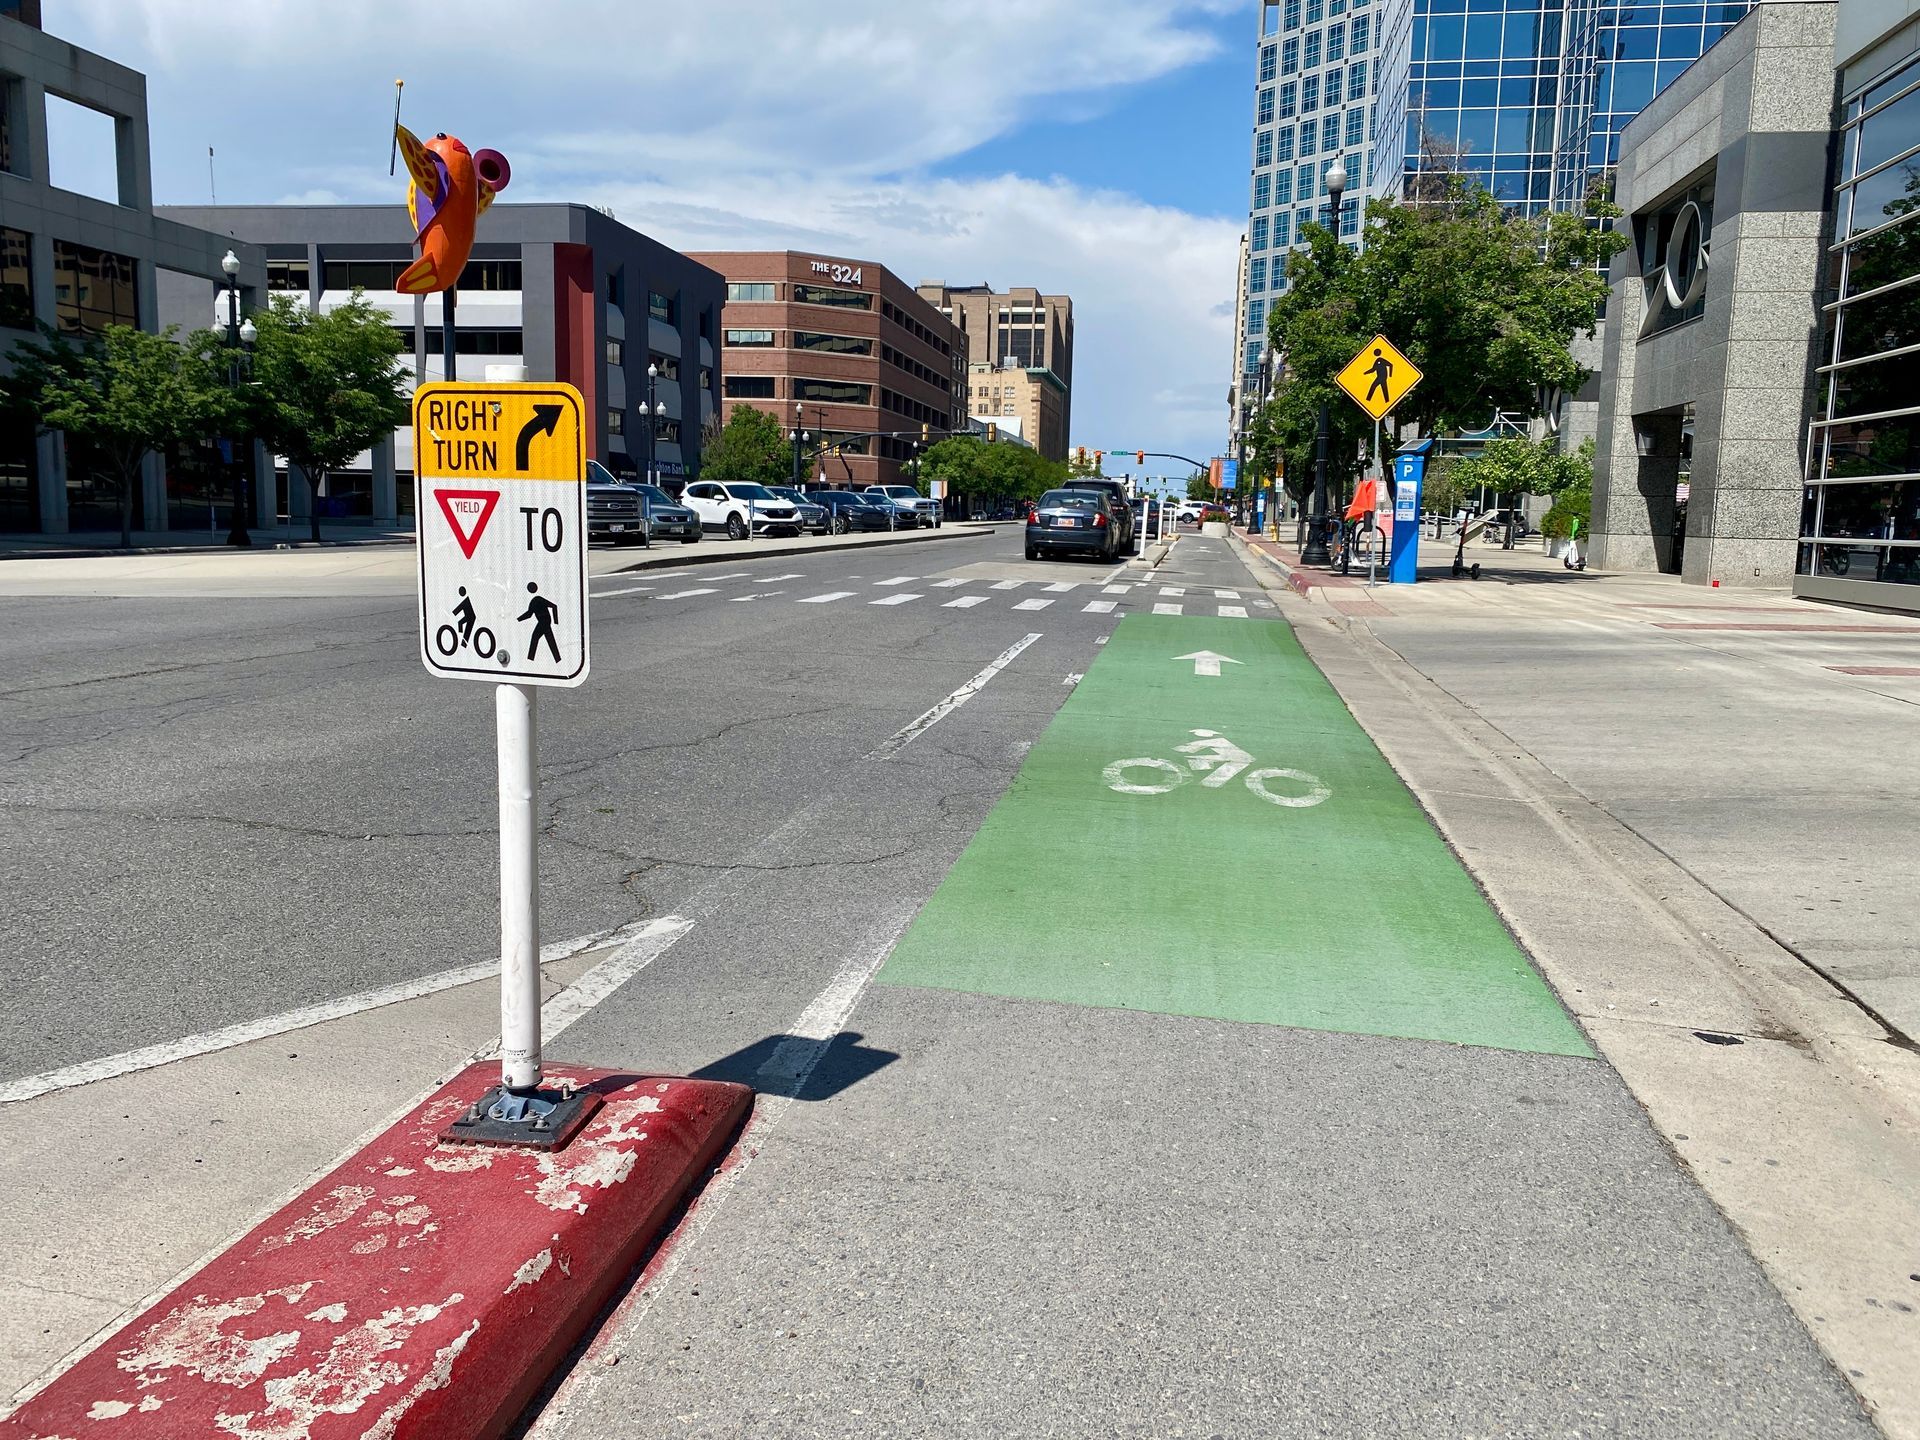 Protected bike lane in an urban roadway with green striped bicycle lane